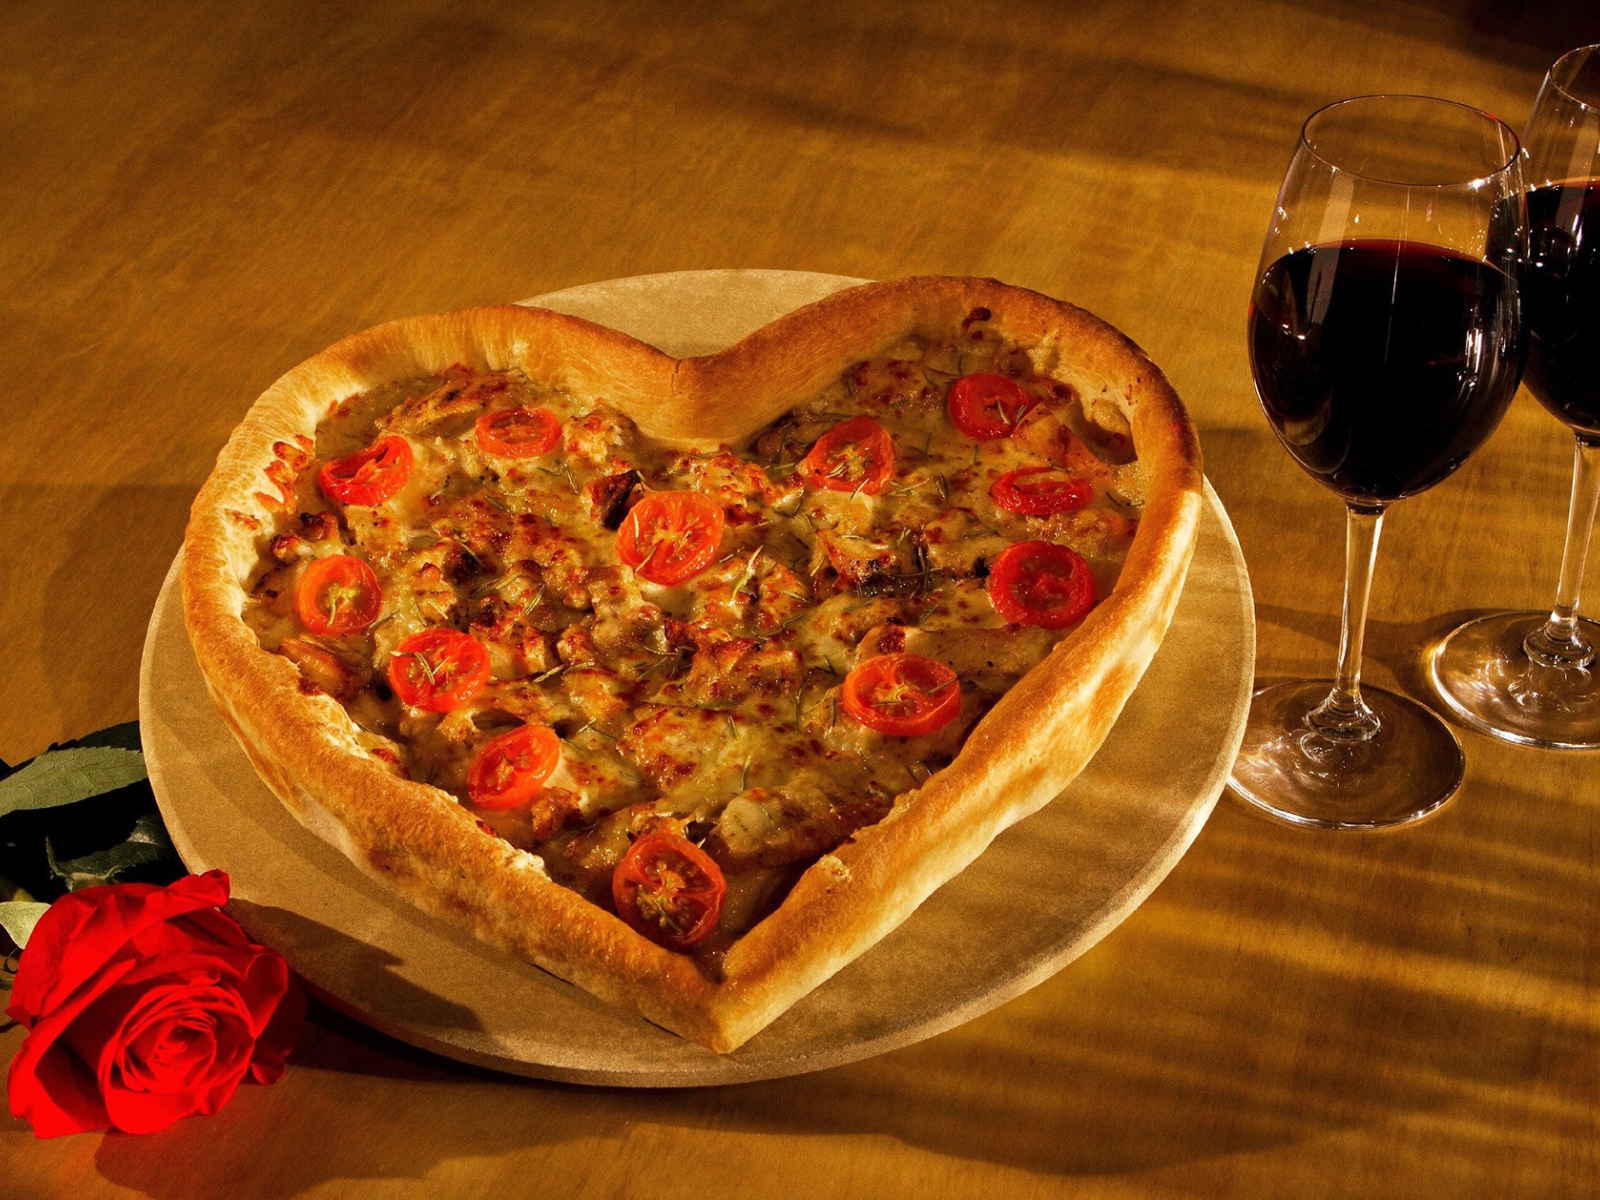 Heart-shaped pizza on a table with a rose and two glasses of wine